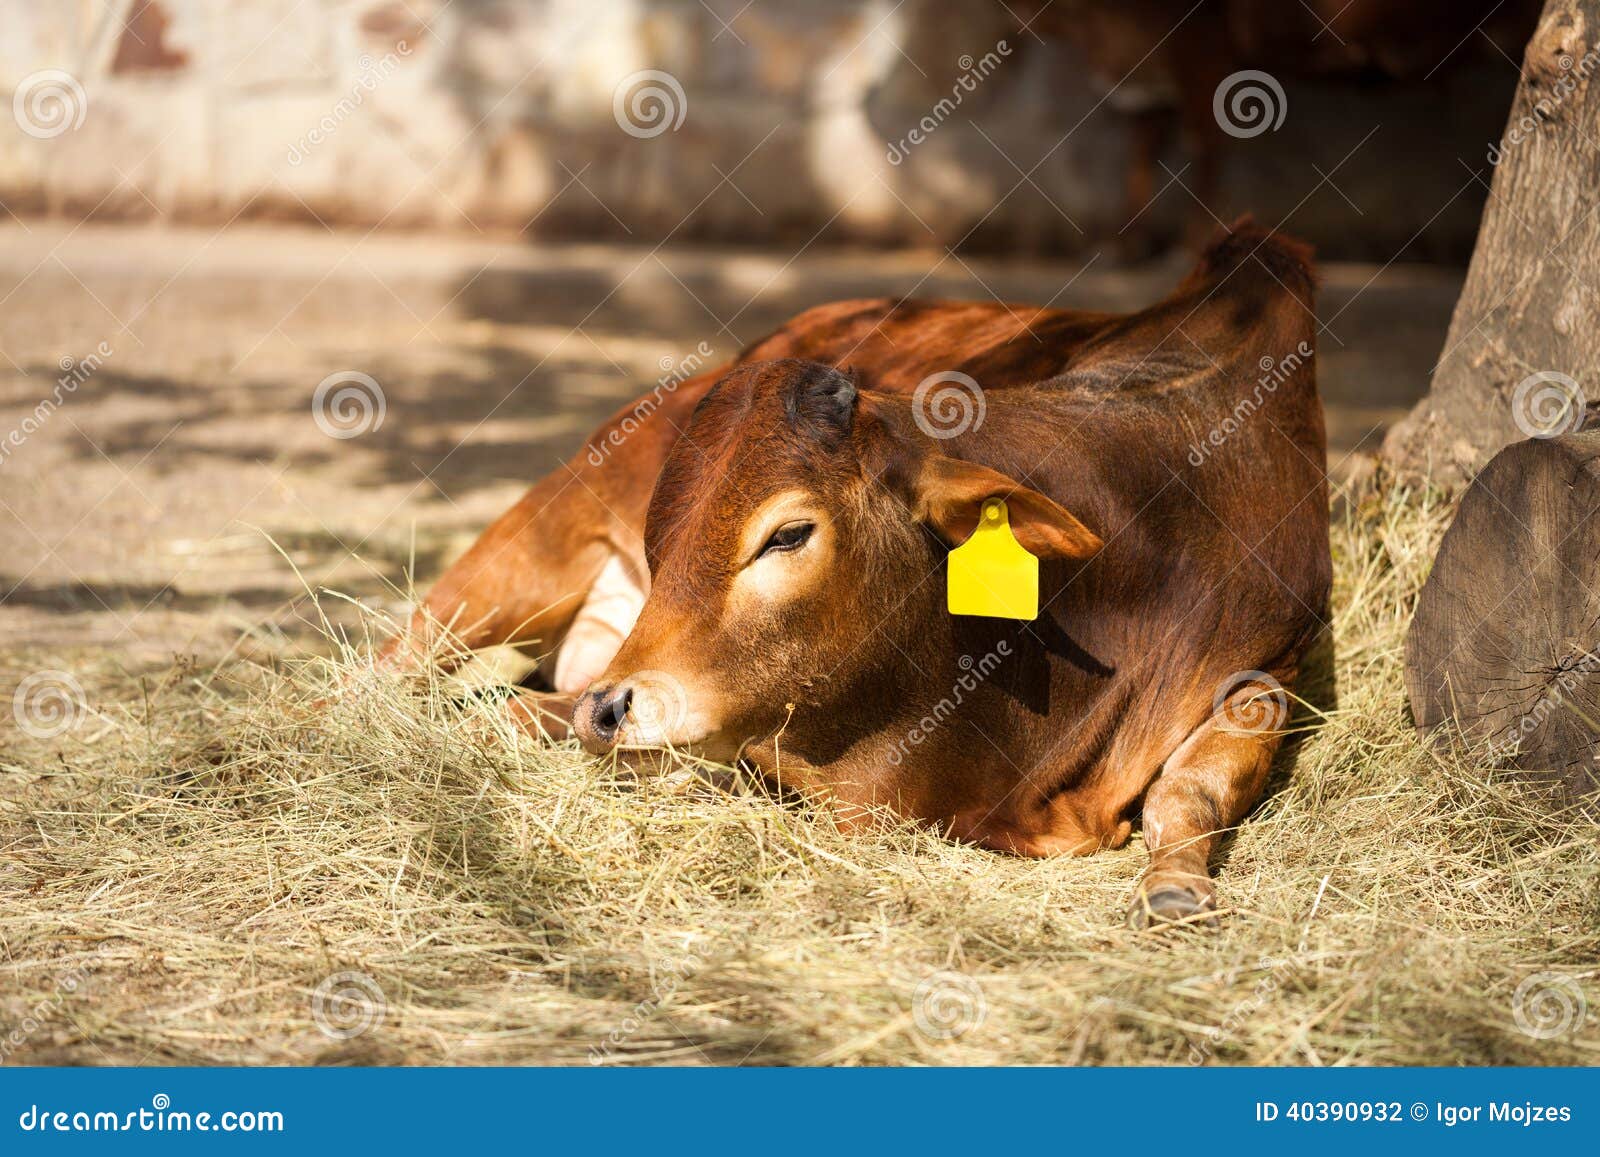 Young cow lying and resting